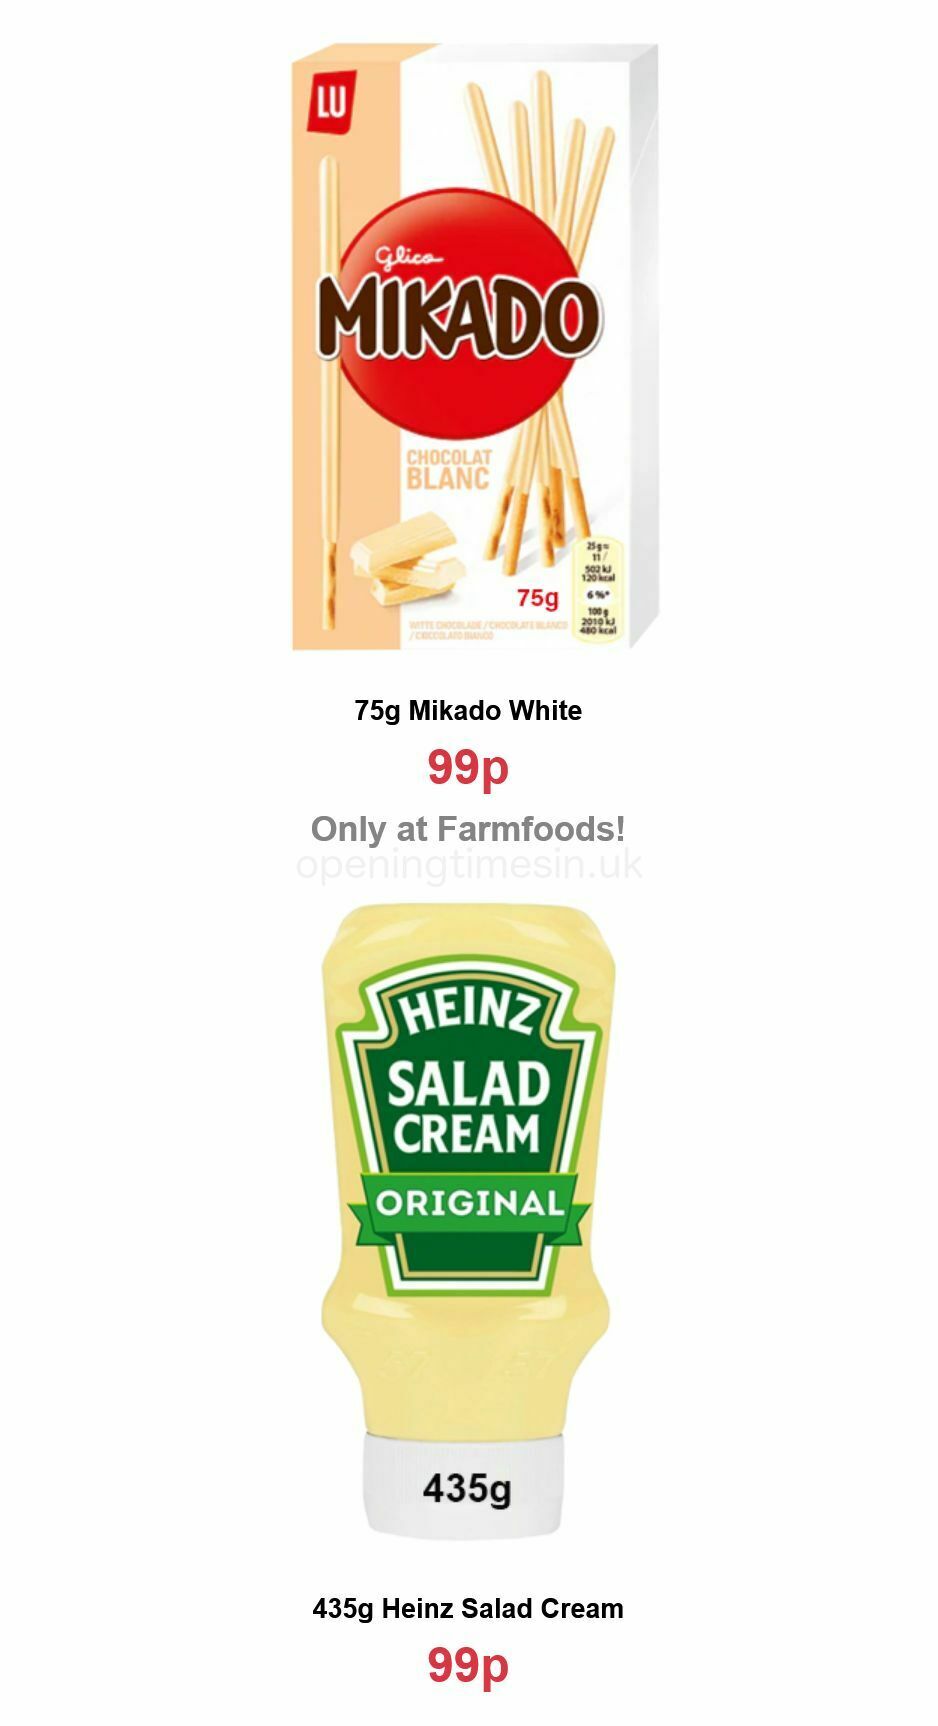 Farmfoods Offers from 31 January